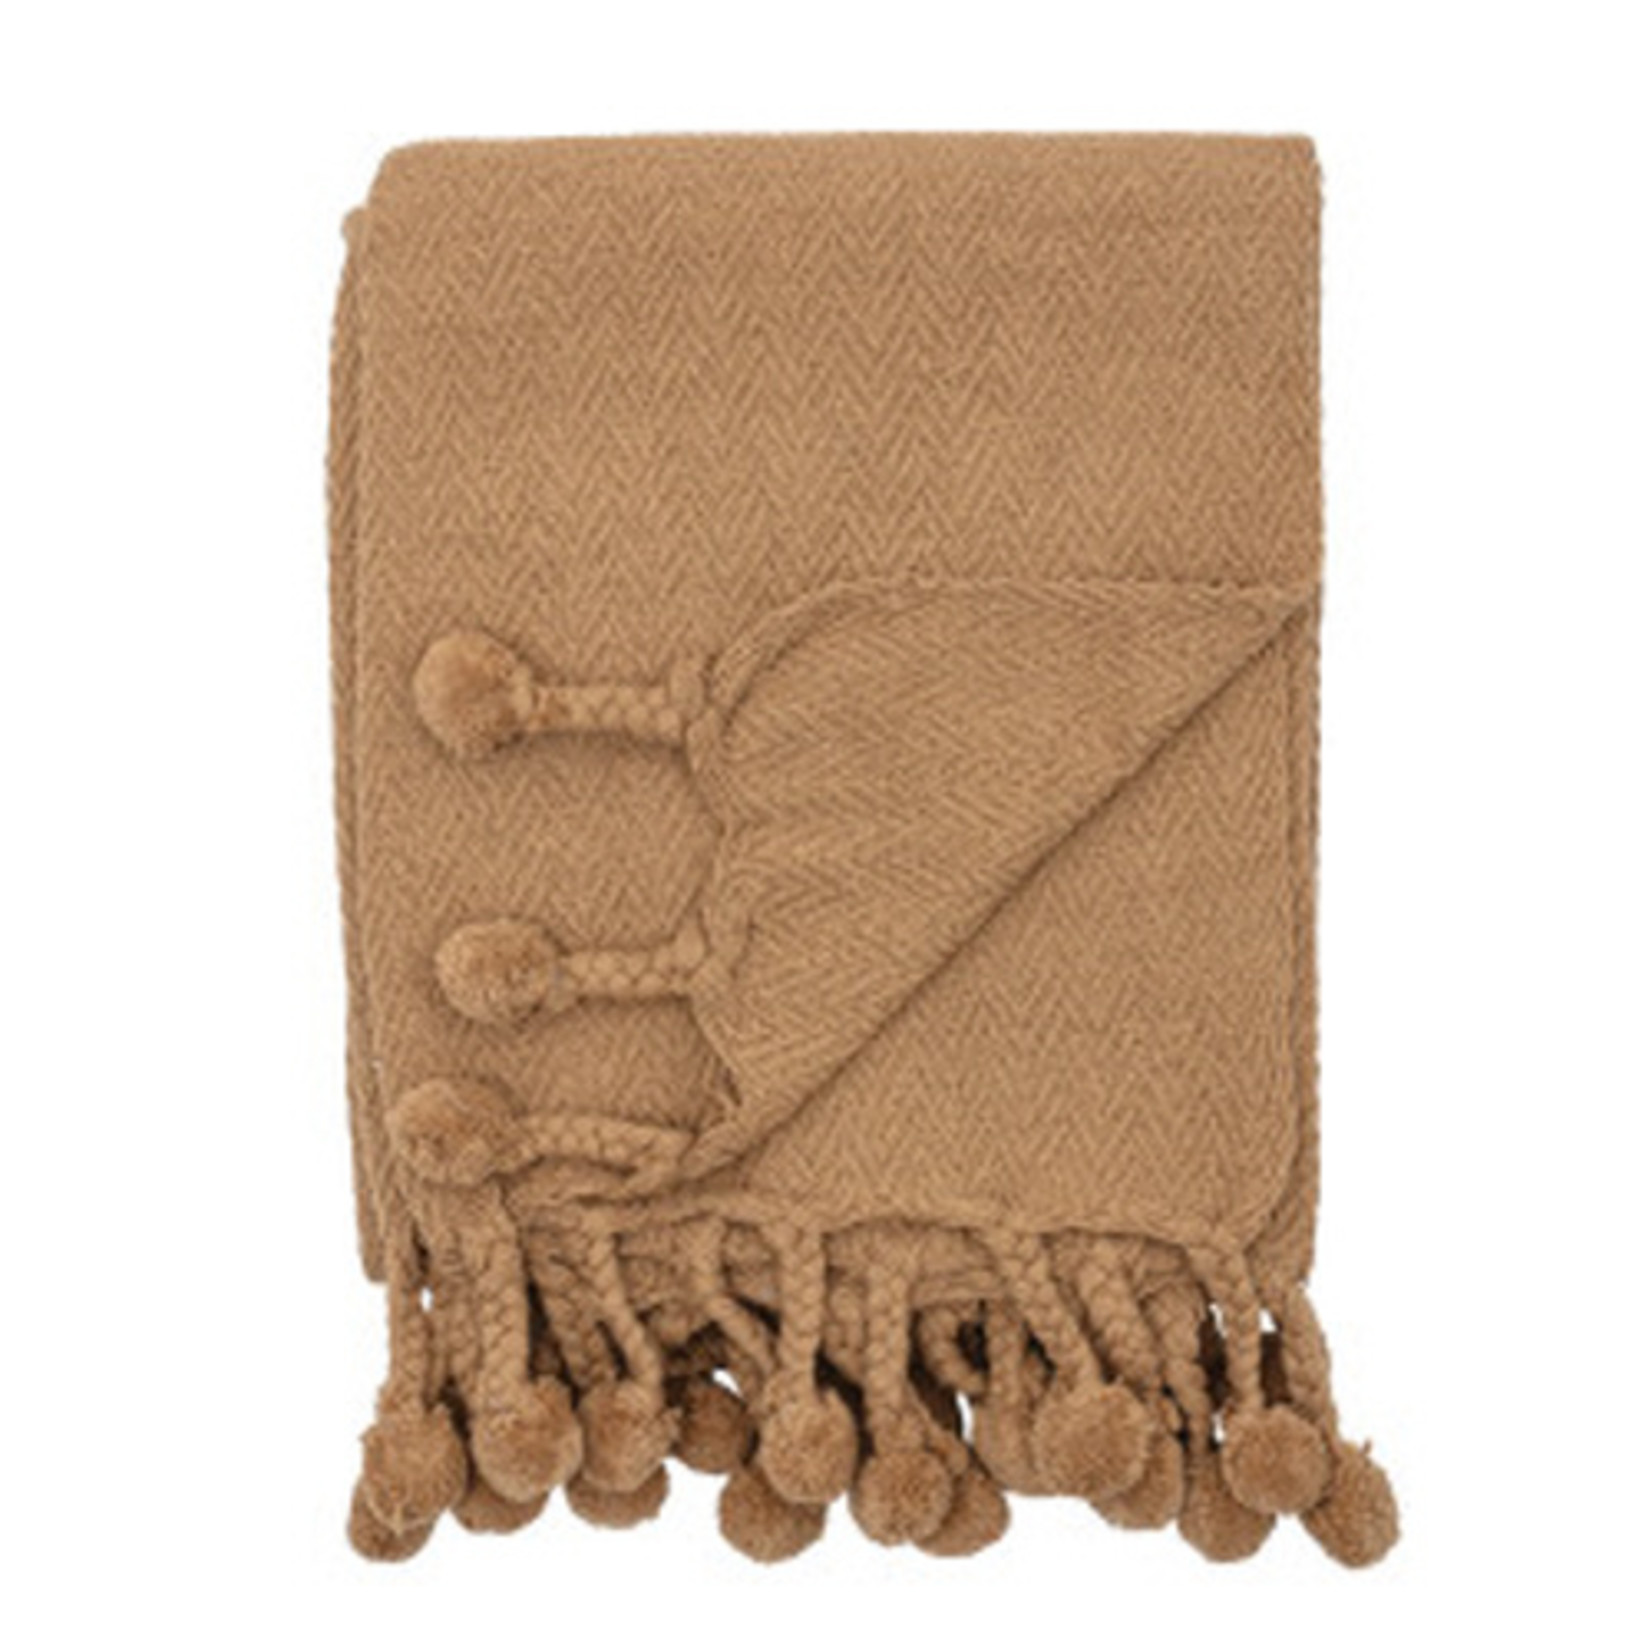 Creative Coop Cotton Throw with Braided PomPom Tassles